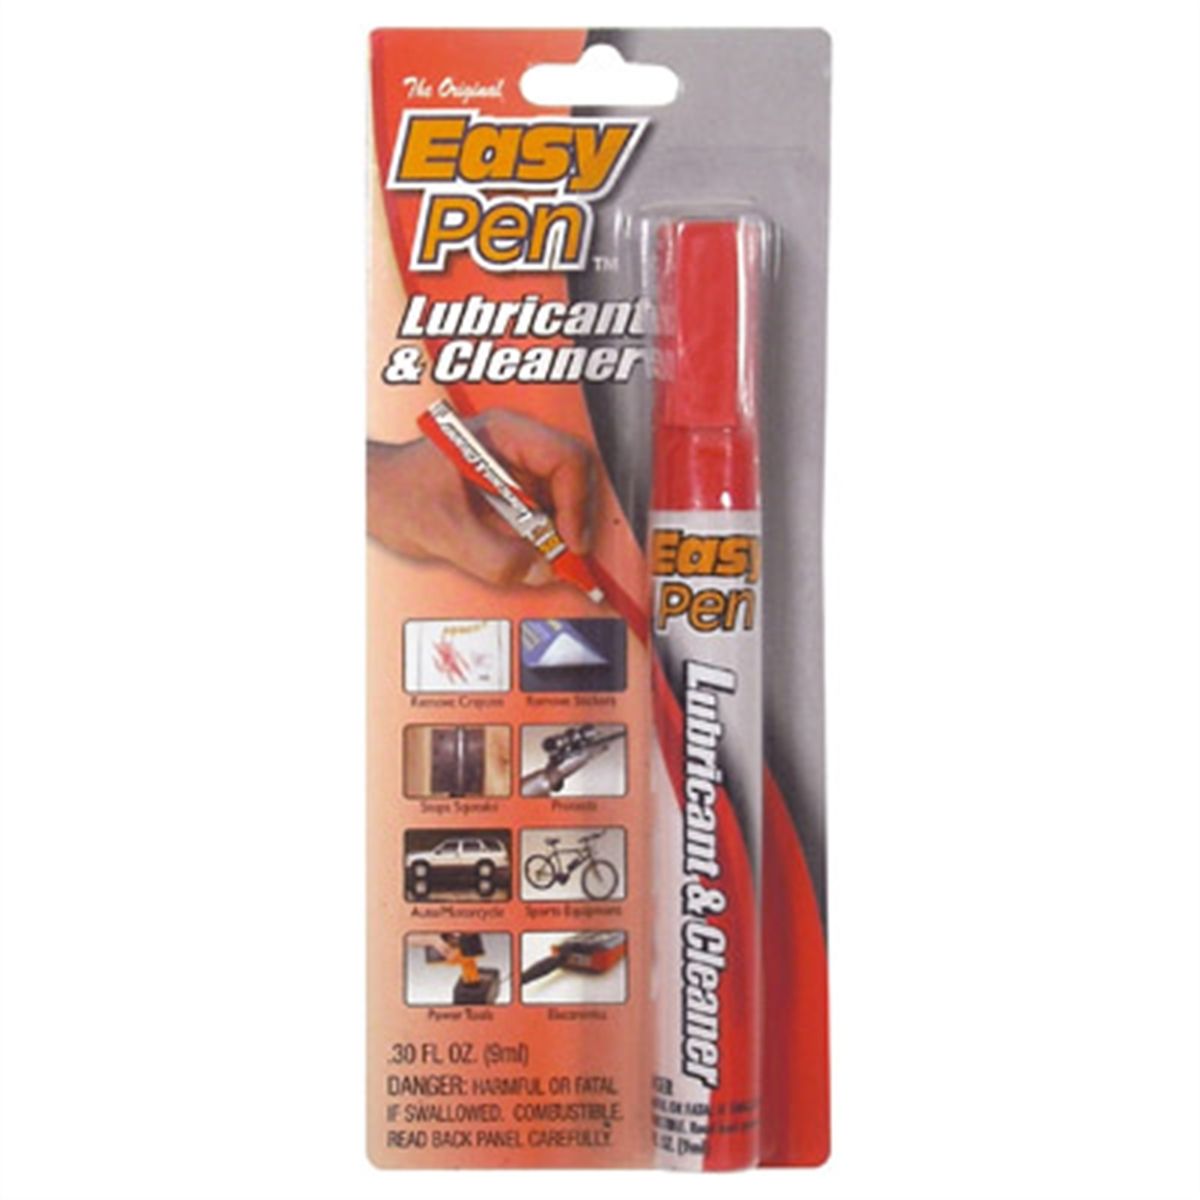 Easy Pen Lubricant & Cleaner